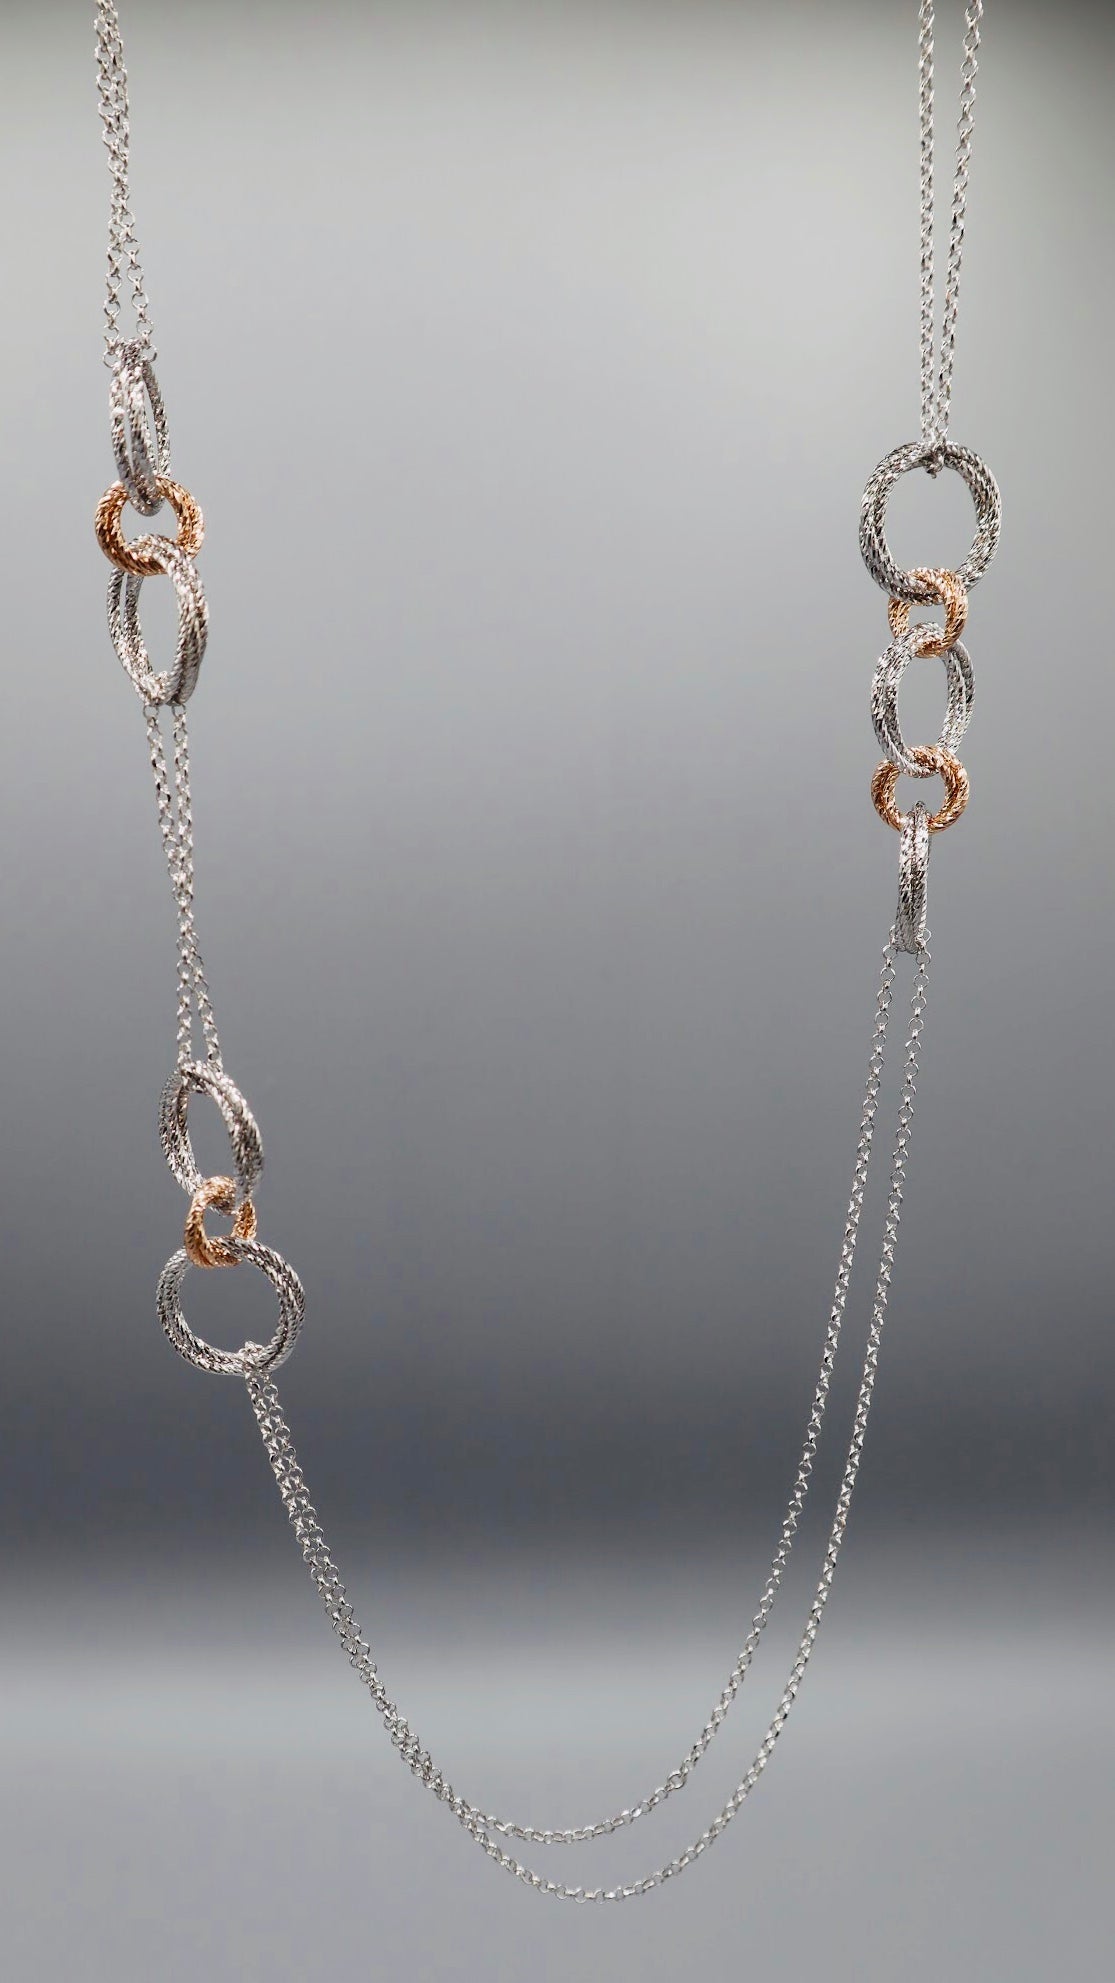 Fraboso - Silver and Rosé Necklace